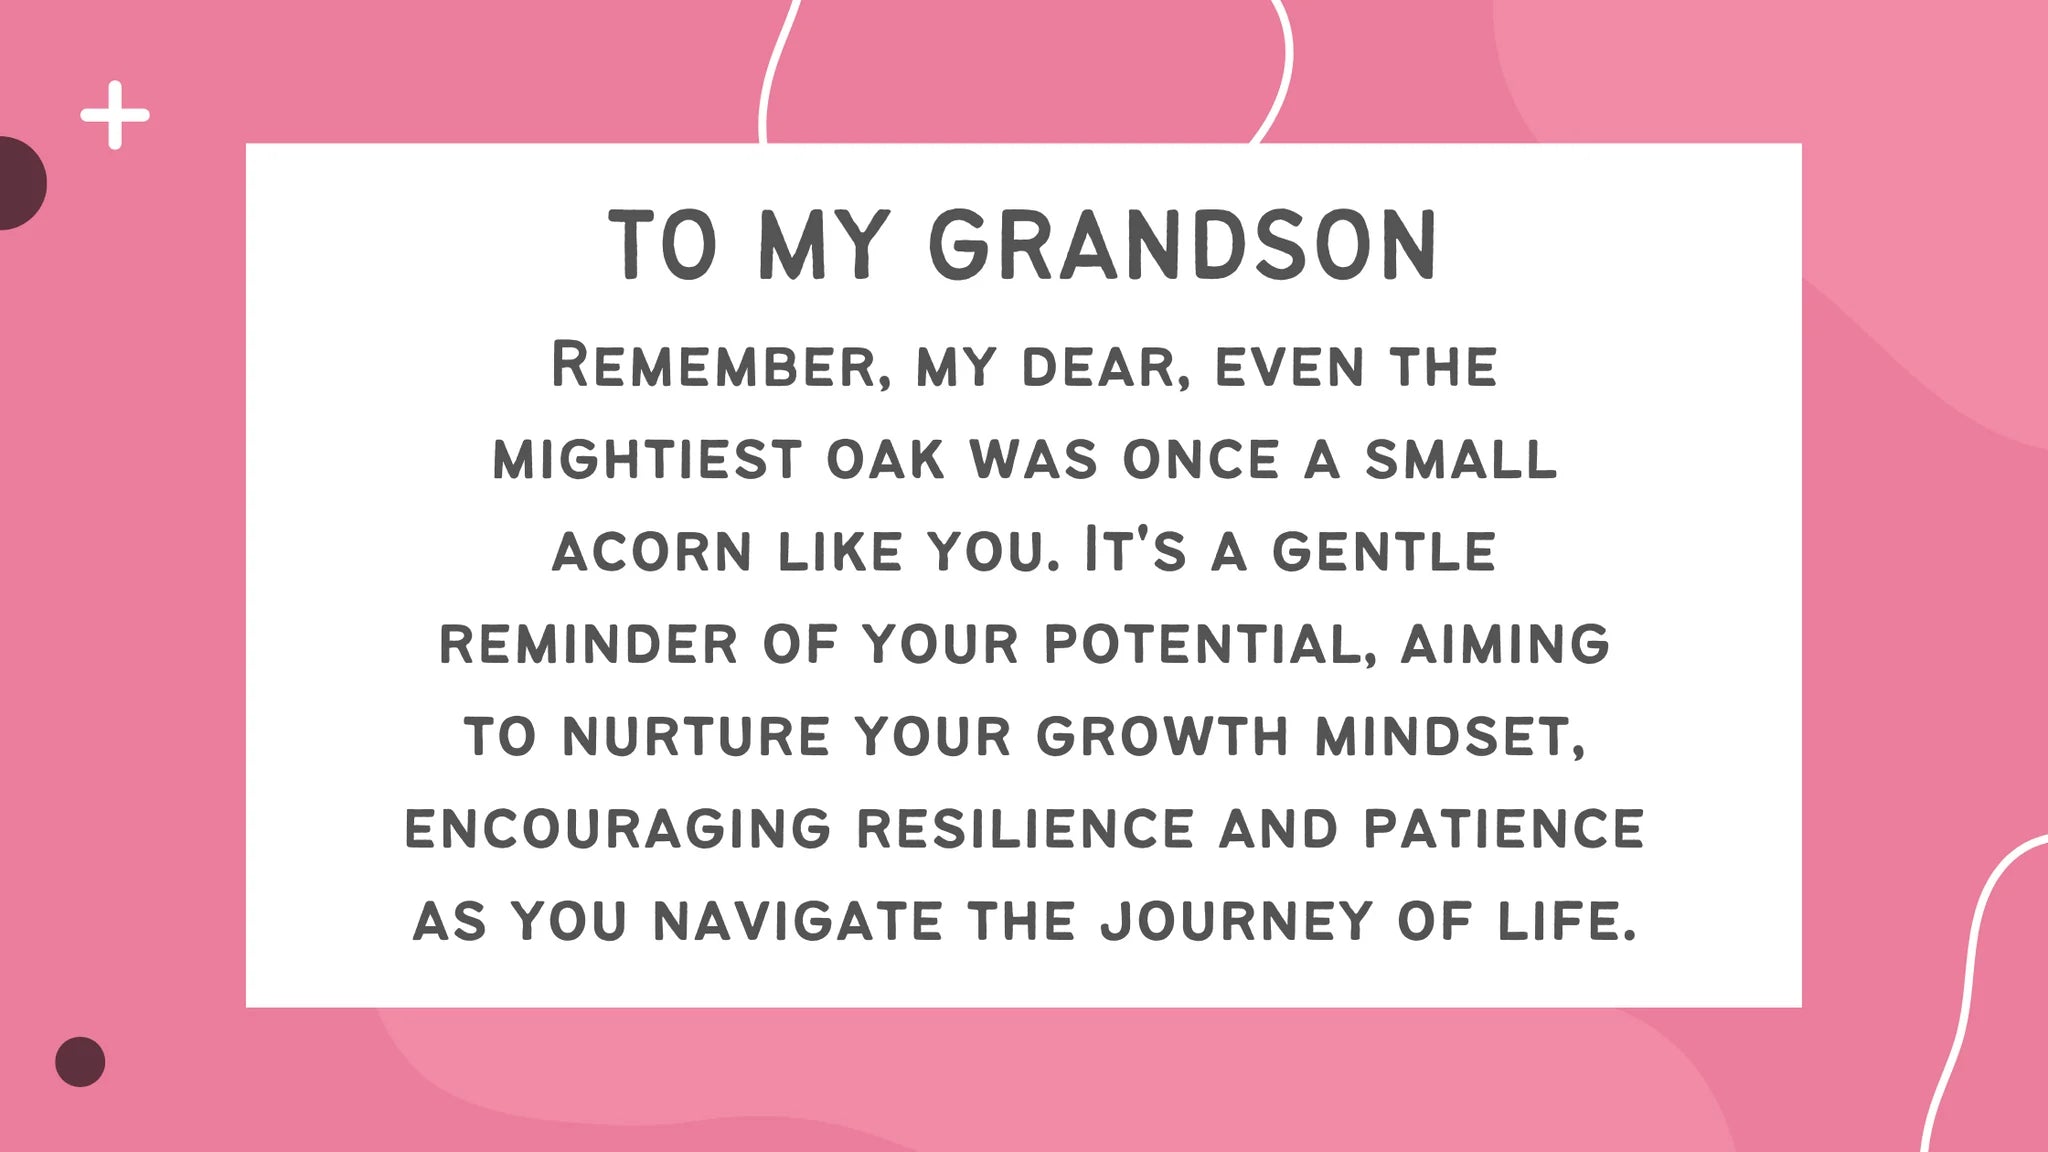 10 Heartfelt Words to Share with Your Grandson: From Me, Your Grandparent